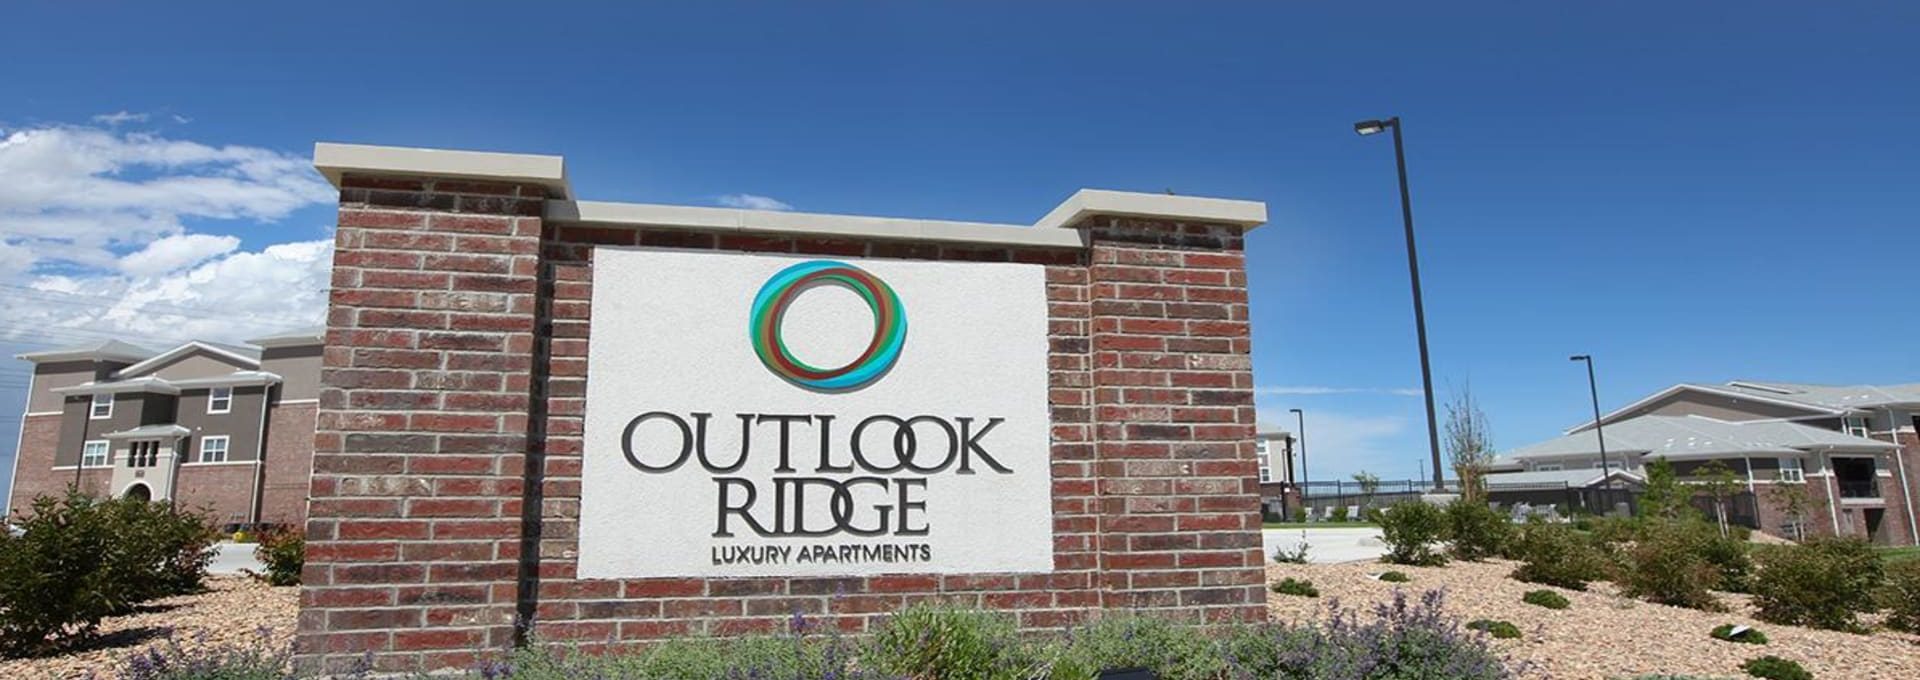 outlook ridge apartments in fort collins, co at The Outlook Ridge Apartments